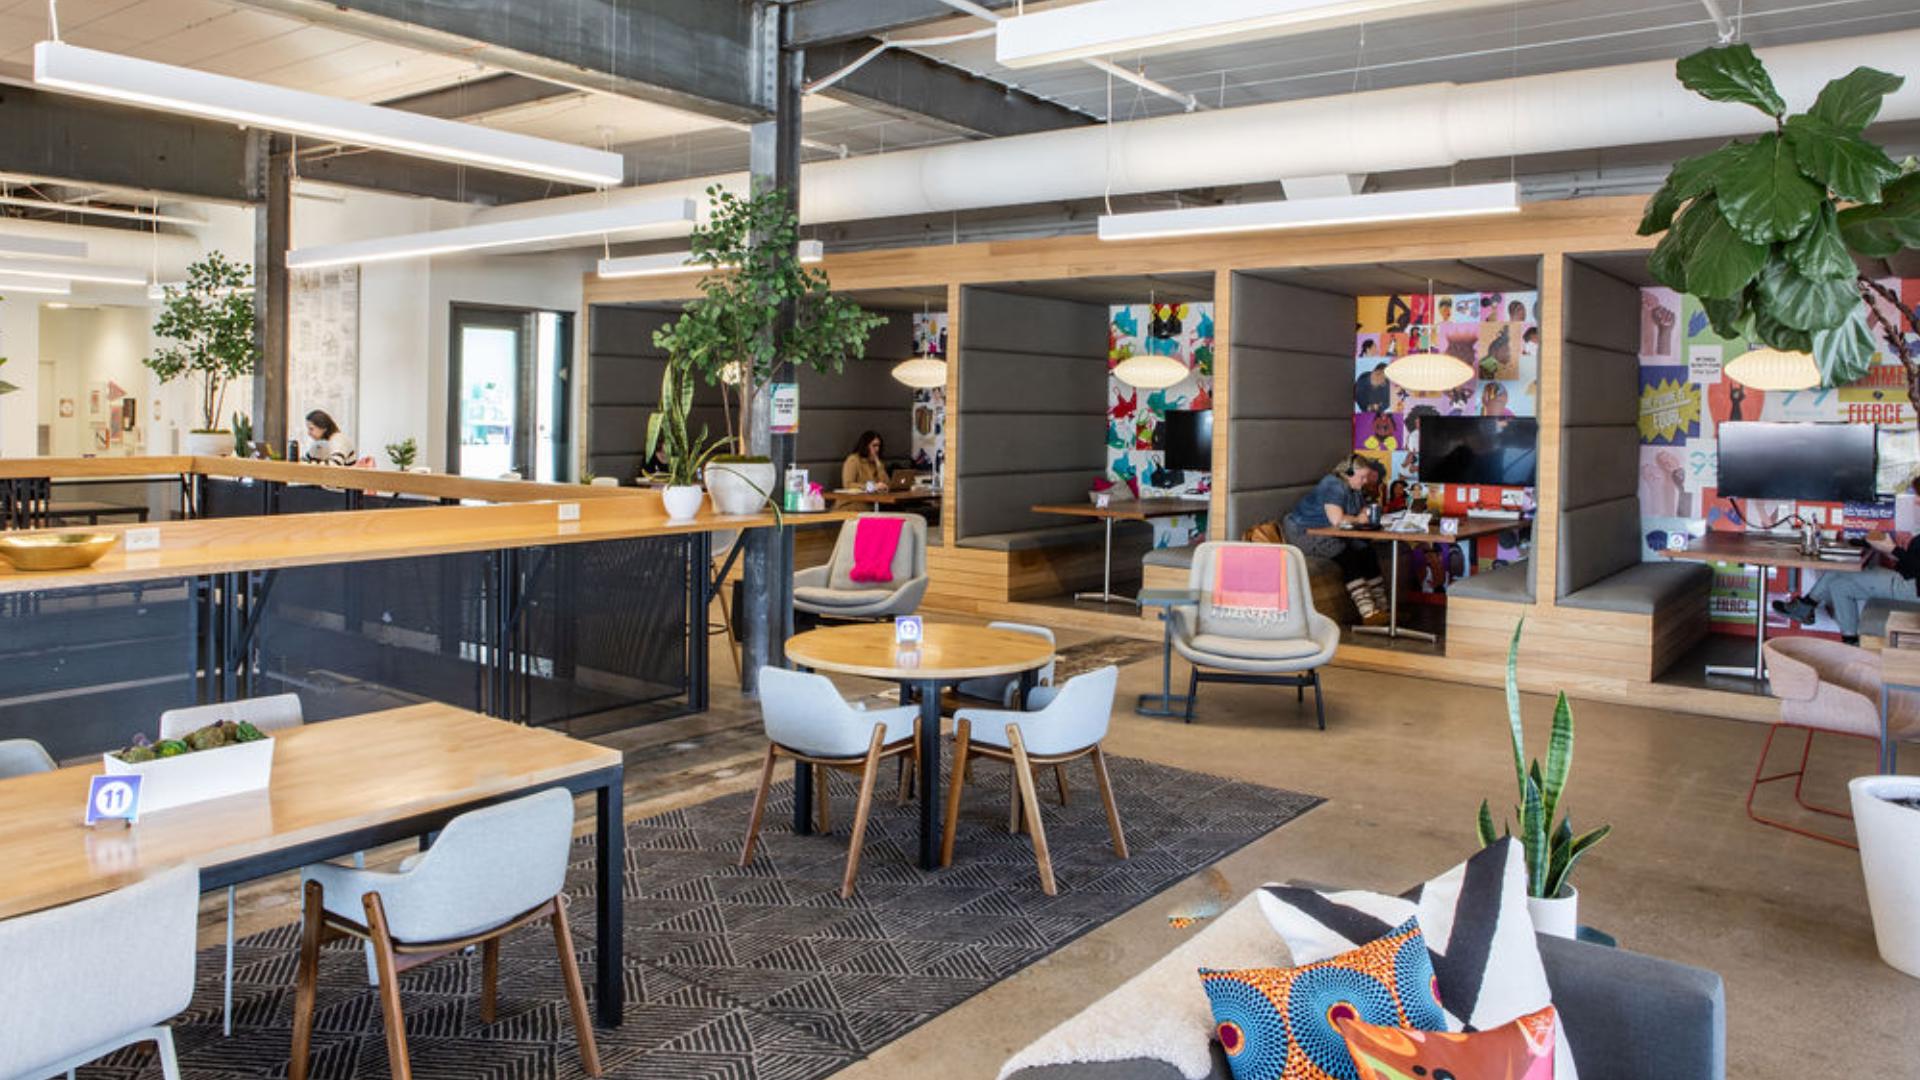 The Coven currently operates five coworking locations throughout Minnesota and Wisconsin.